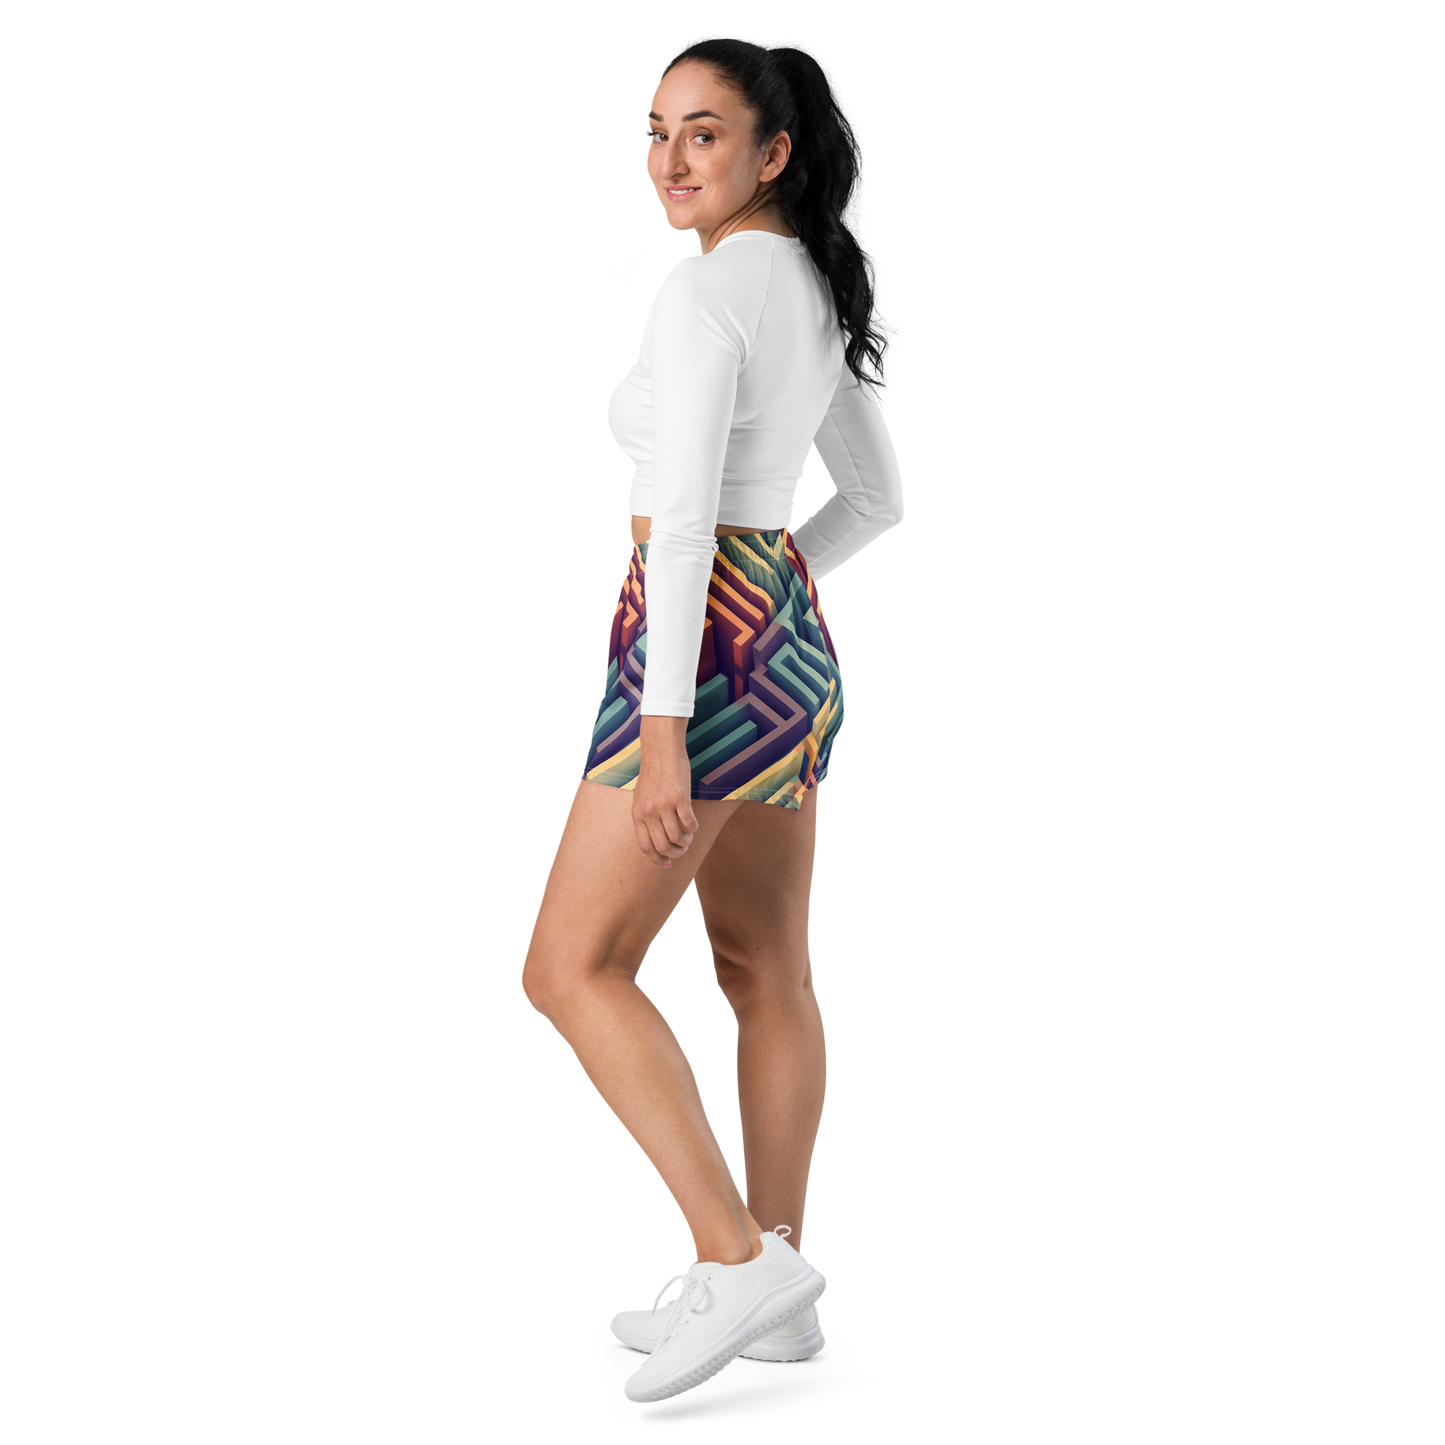 3D Maze Illusion | 3D Patterns | All-Over Print Women’s Recycled Athletic Shorts - #3